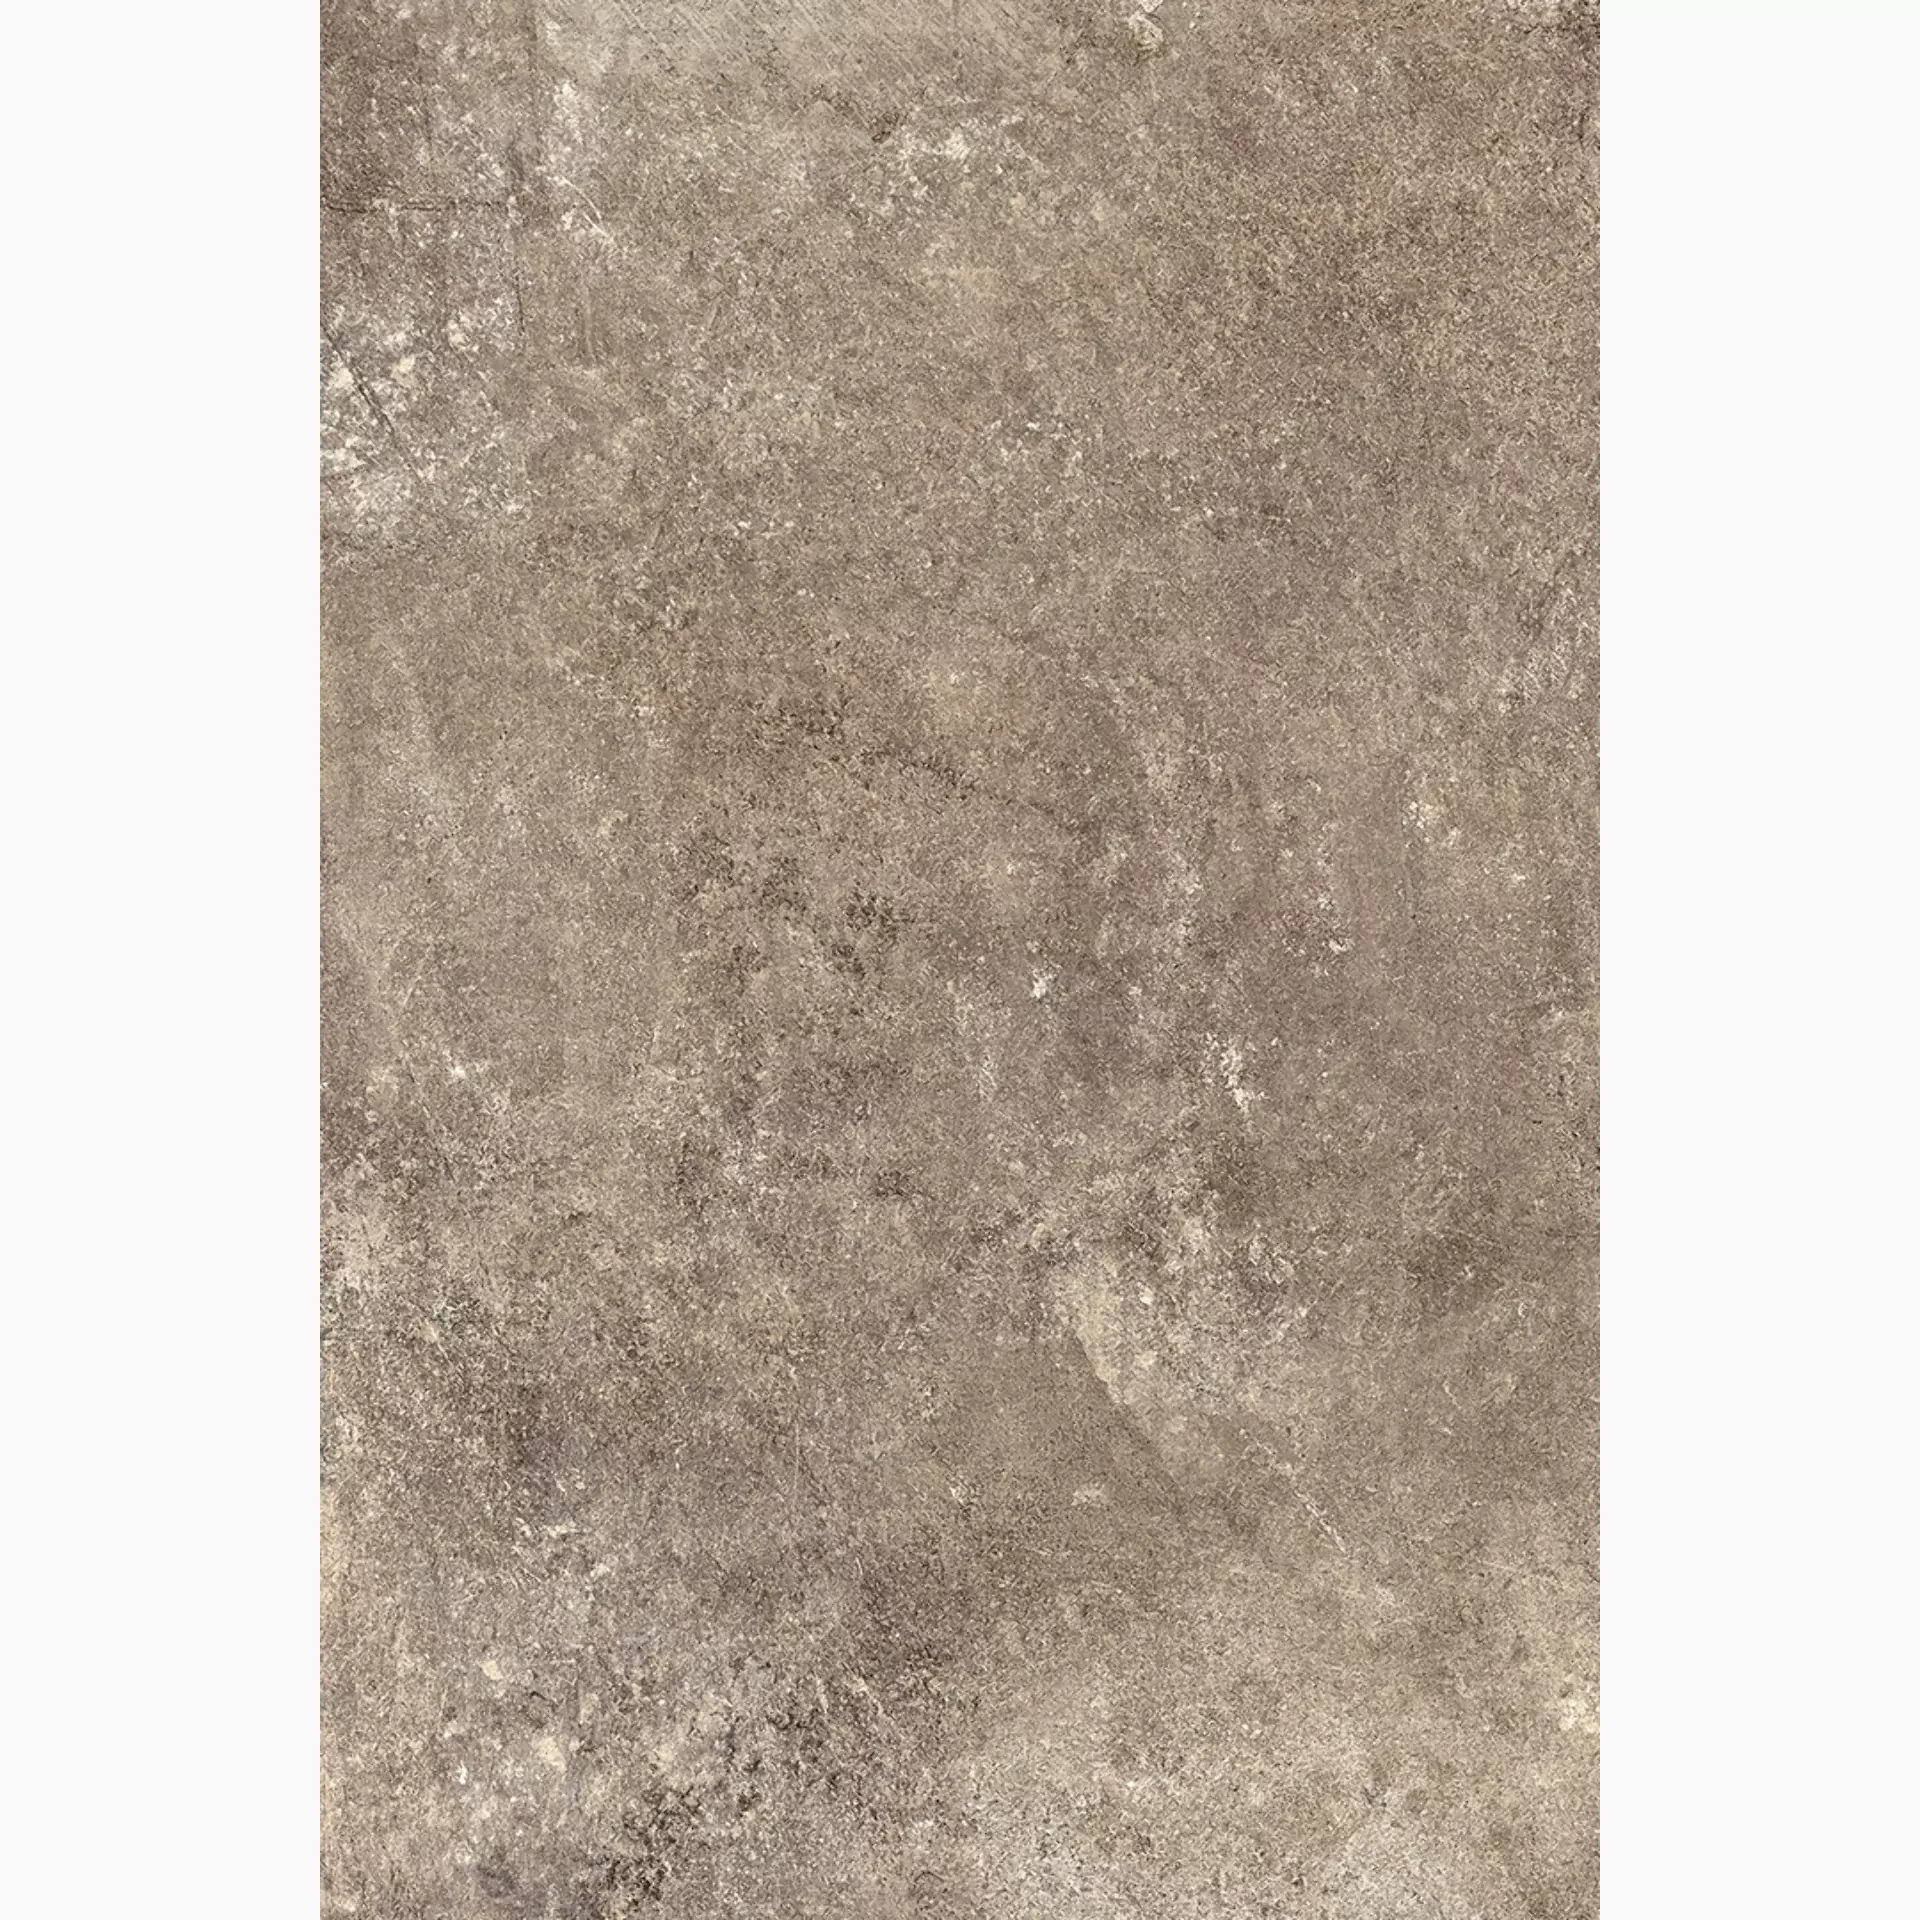 Fondovalle Reframe Taupe Natural REF096 40x80cm rectified 8,5mm